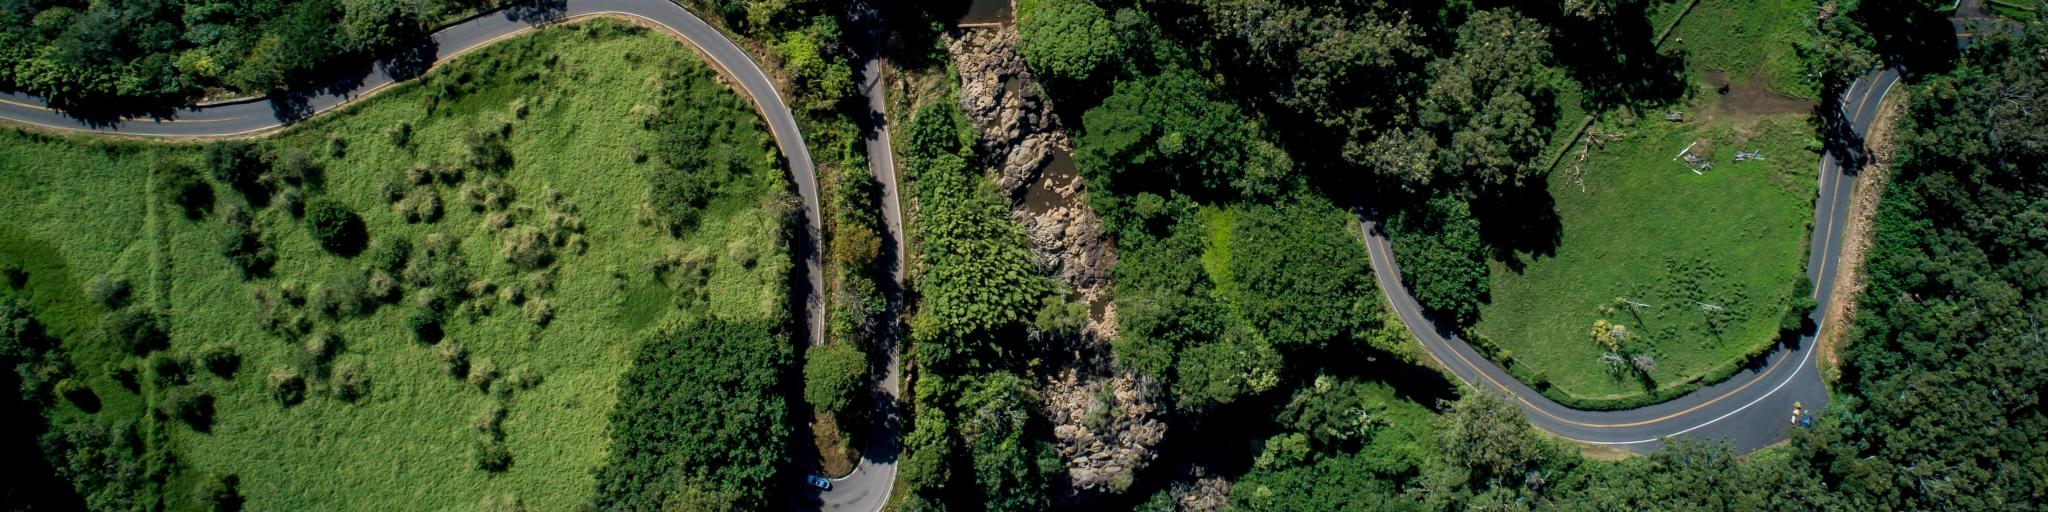 Aerial shots of Road to Hana weaving through the bamboo forest, on Maui, Hawaii